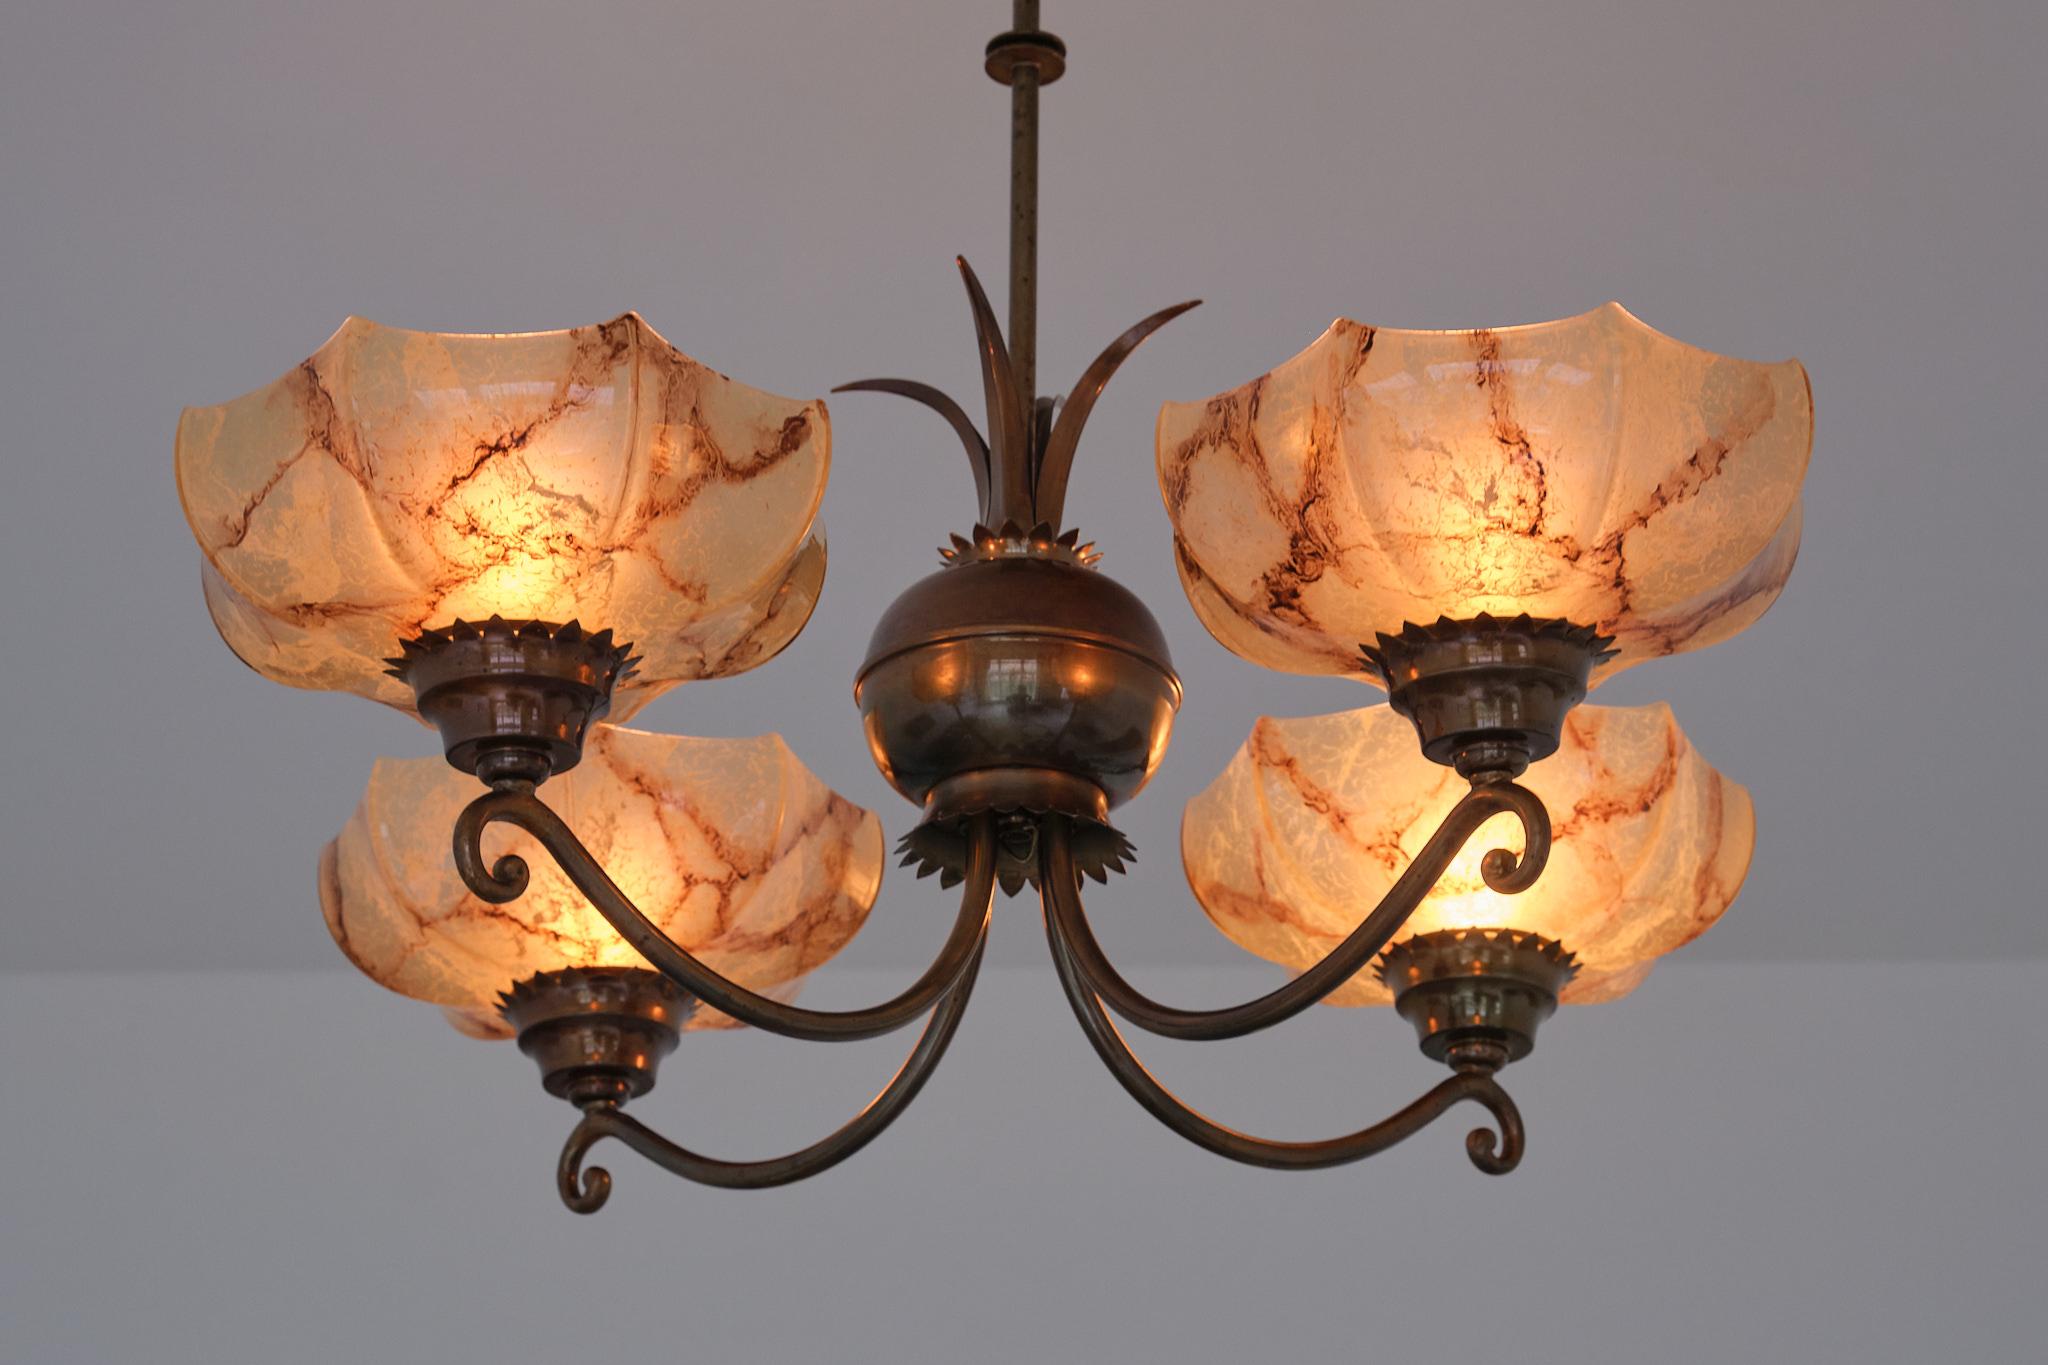 Harald Notini Chandelier in Brass and Marbled Glass, Böhlmarks, Sweden, 1927 For Sale 7